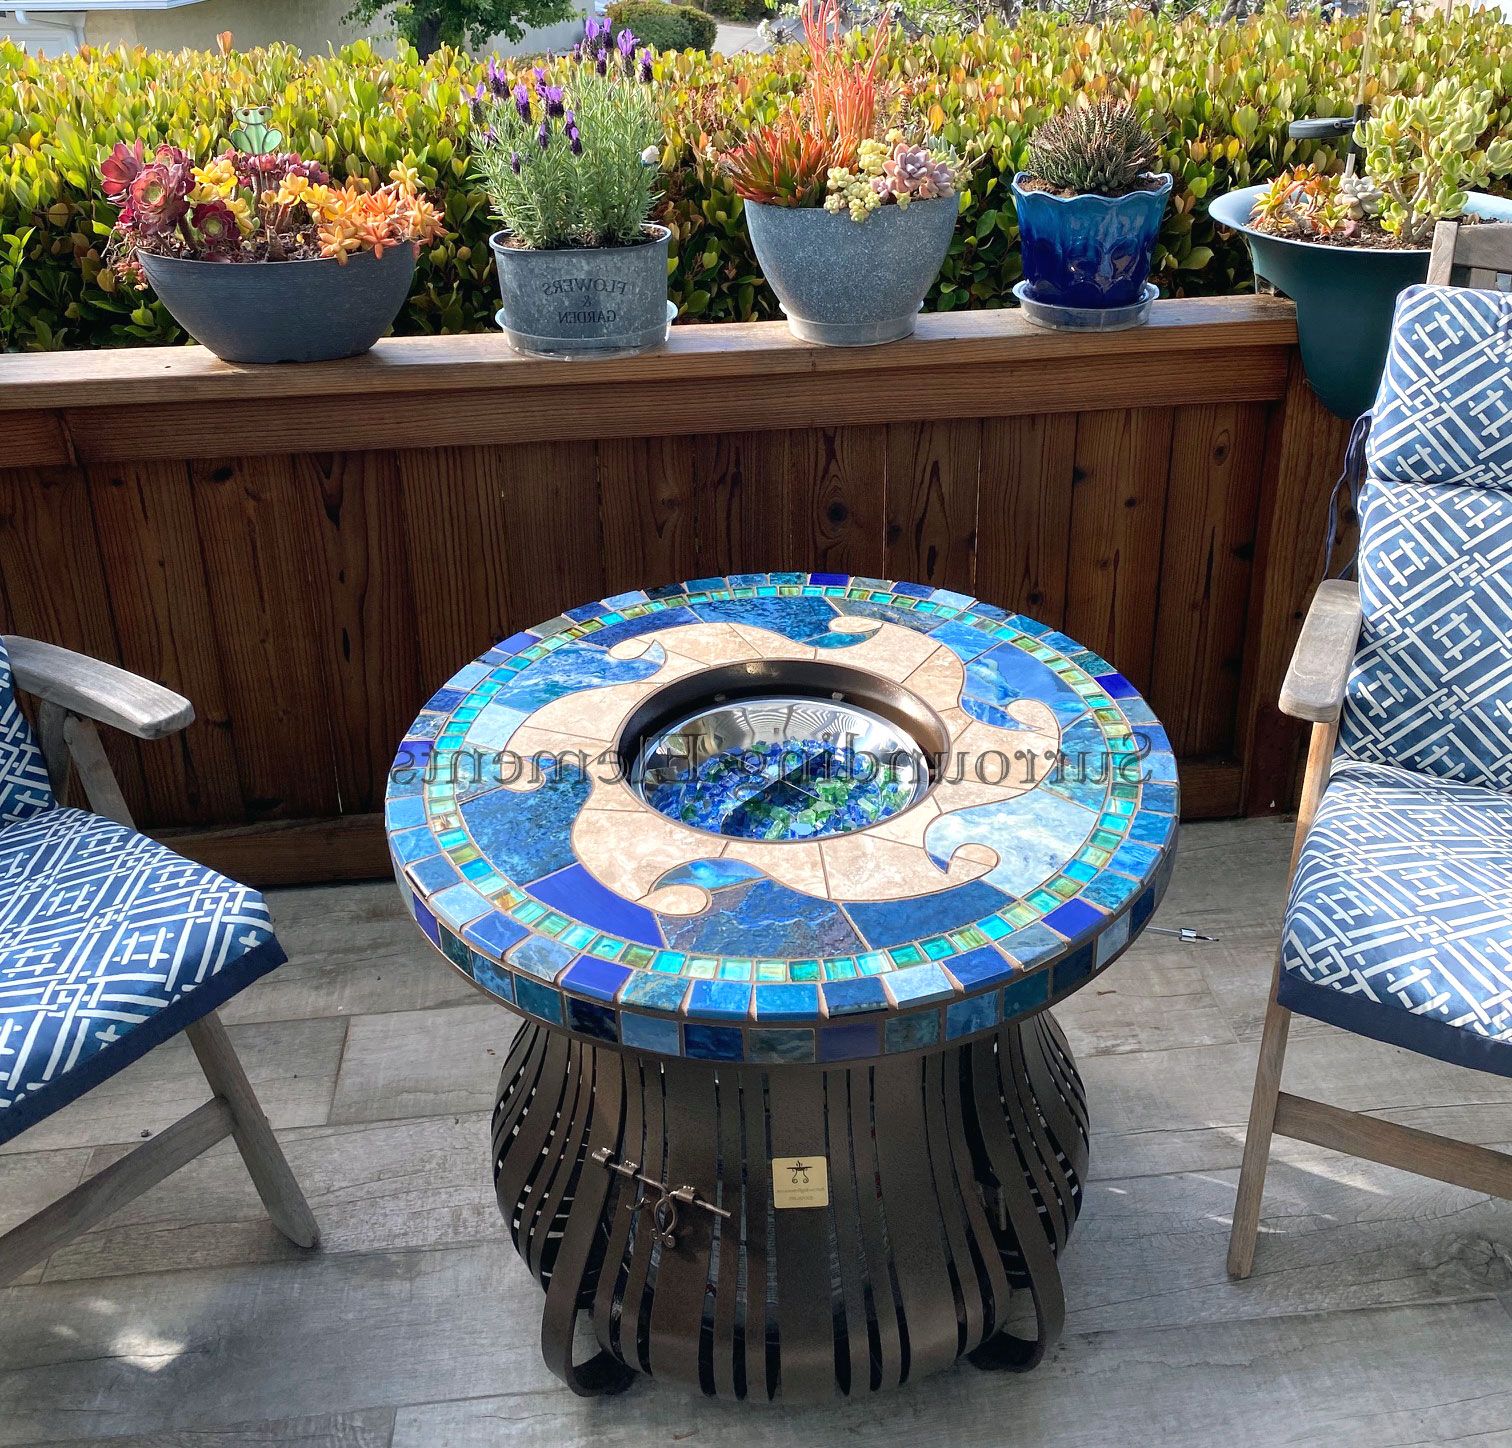 Ocean Wave Mosaic Outdoor Accent Tables Within Most Recent Patio Tablessurrounding Elements – Backyard Patio Furniture (View 7 of 15)